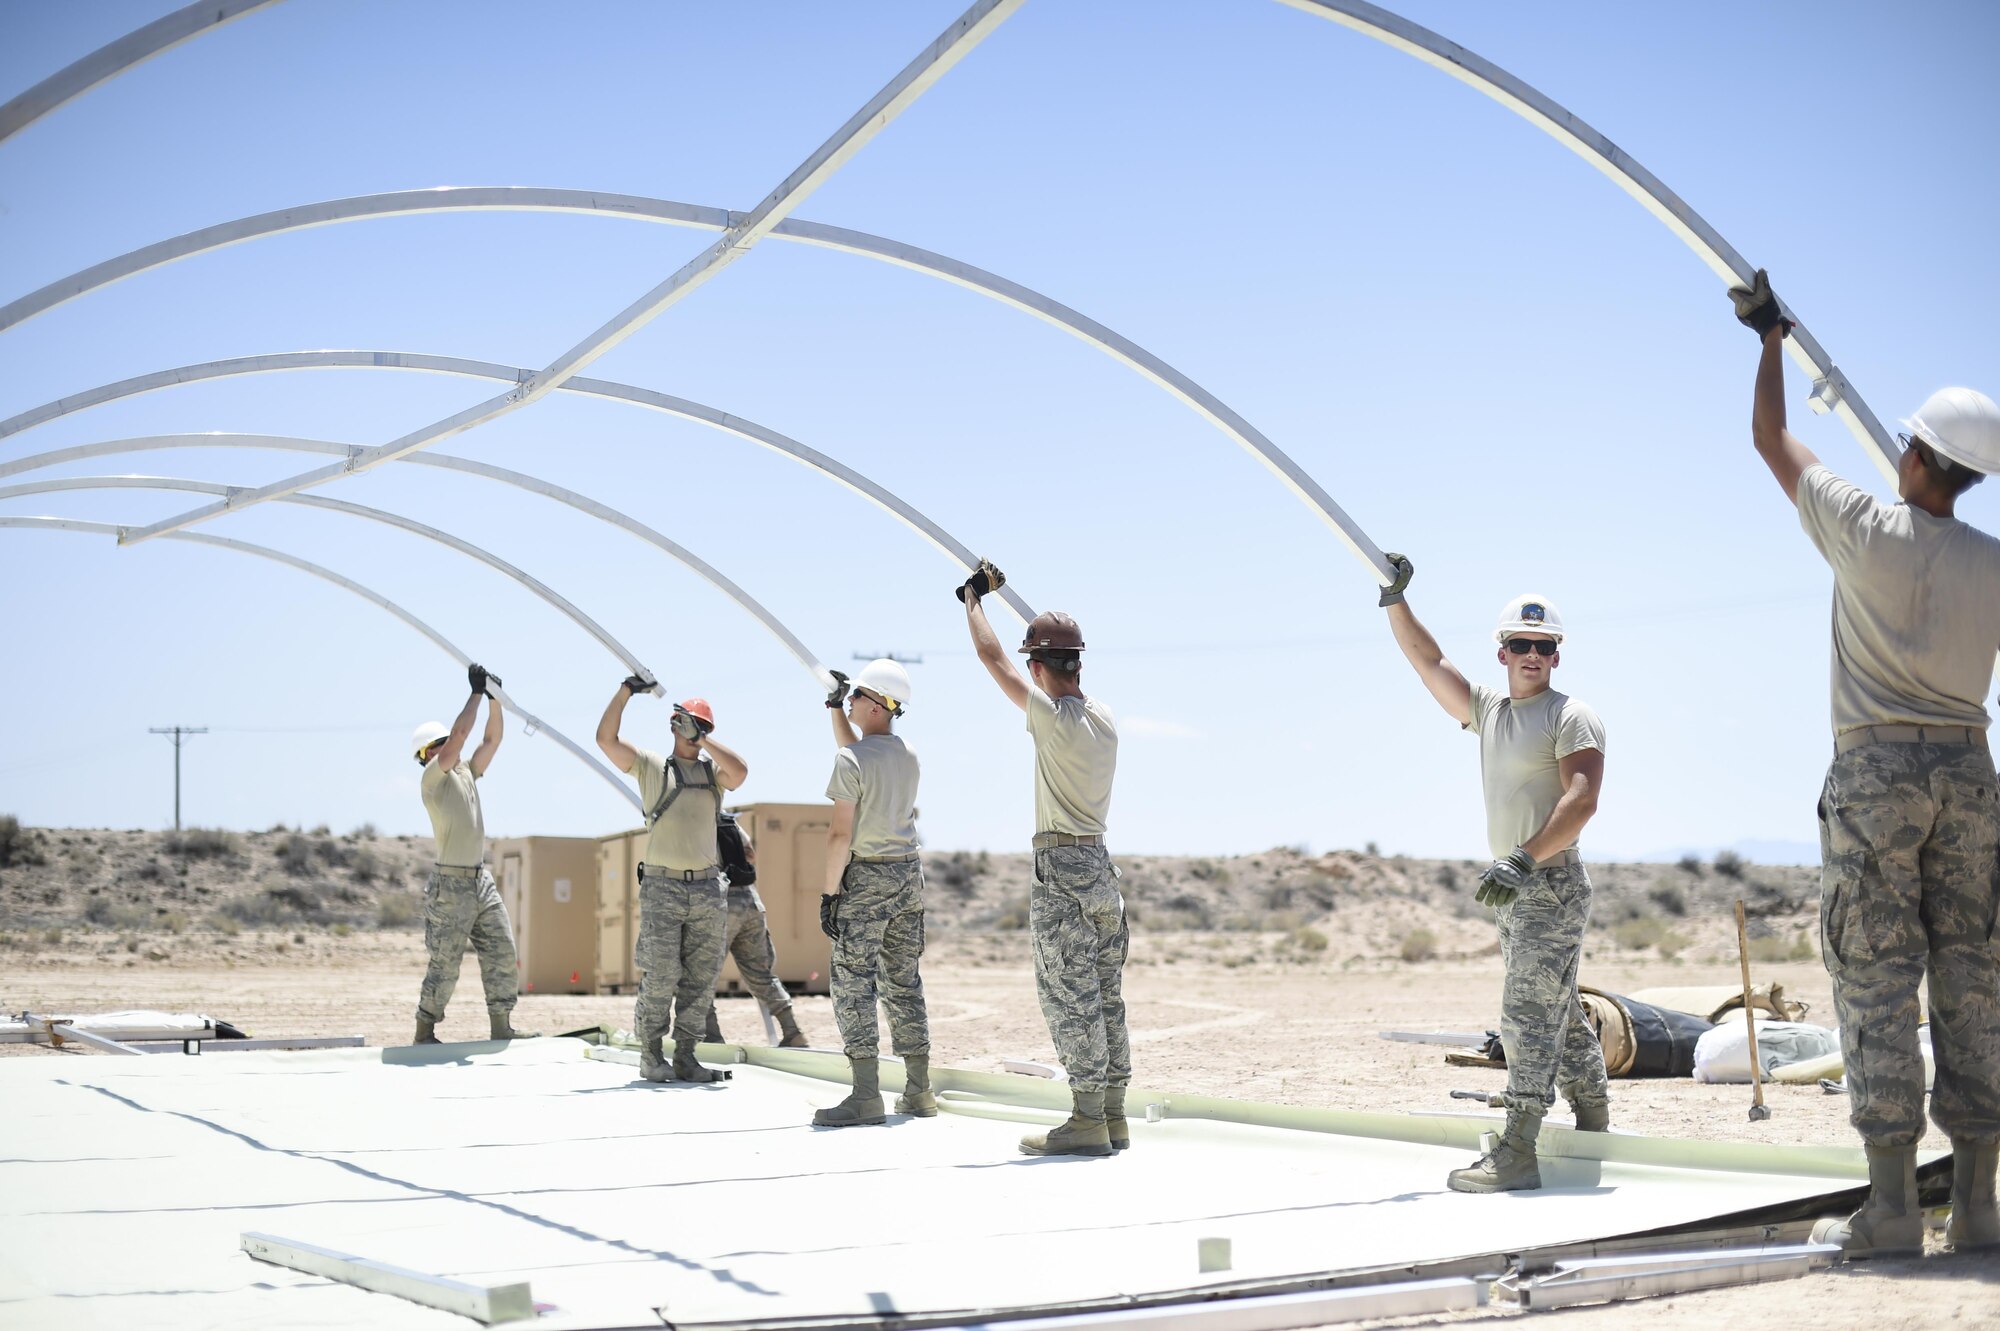 Airmen from the 49th Materiel Maintenance Group and the 49th Civil Engineer Squadron work together to build a structure during a three day joint training exercise at Holloman Air Base, N.M on June 7. The Base Expeditionary Airfield Resources team is comprised of several Air Force specialties including aerospace ground equipment, structures, heating/air conditioning and electrical, as well as lodging, industrial and airfield capabilities at various locations throughout the world. Members of BEAR base build hangars in preparation to deploy at a moments notice. (Last names being withheld due to operational requirements. U.S. Air Force Photo by Staff Sgt. Stacy Moless)